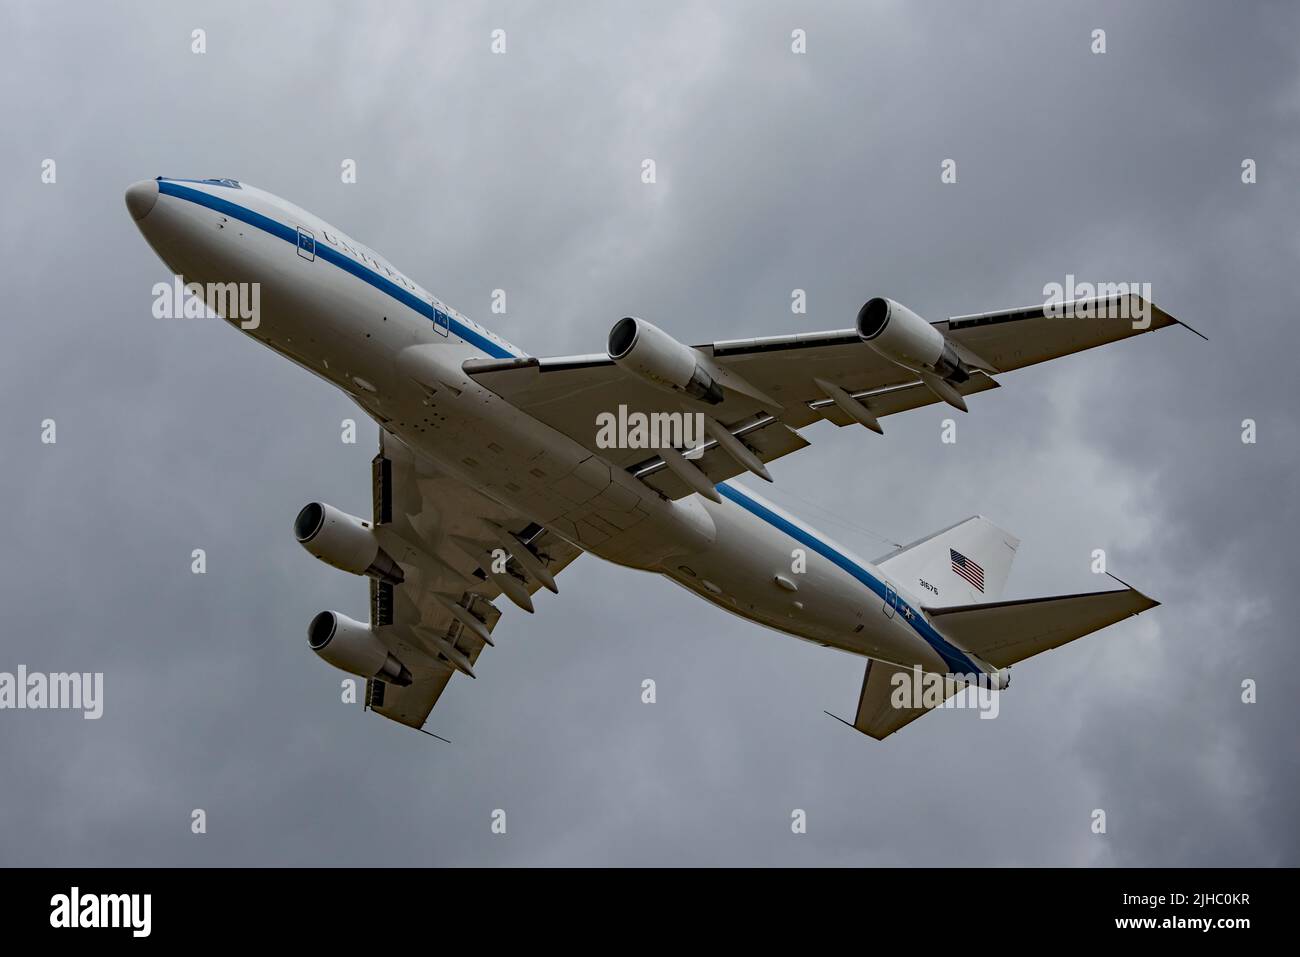 USAF Boeing E-4B Nightwatch aircraft arriving at RAF Fairford on the 15th July 2022. Stock Photo